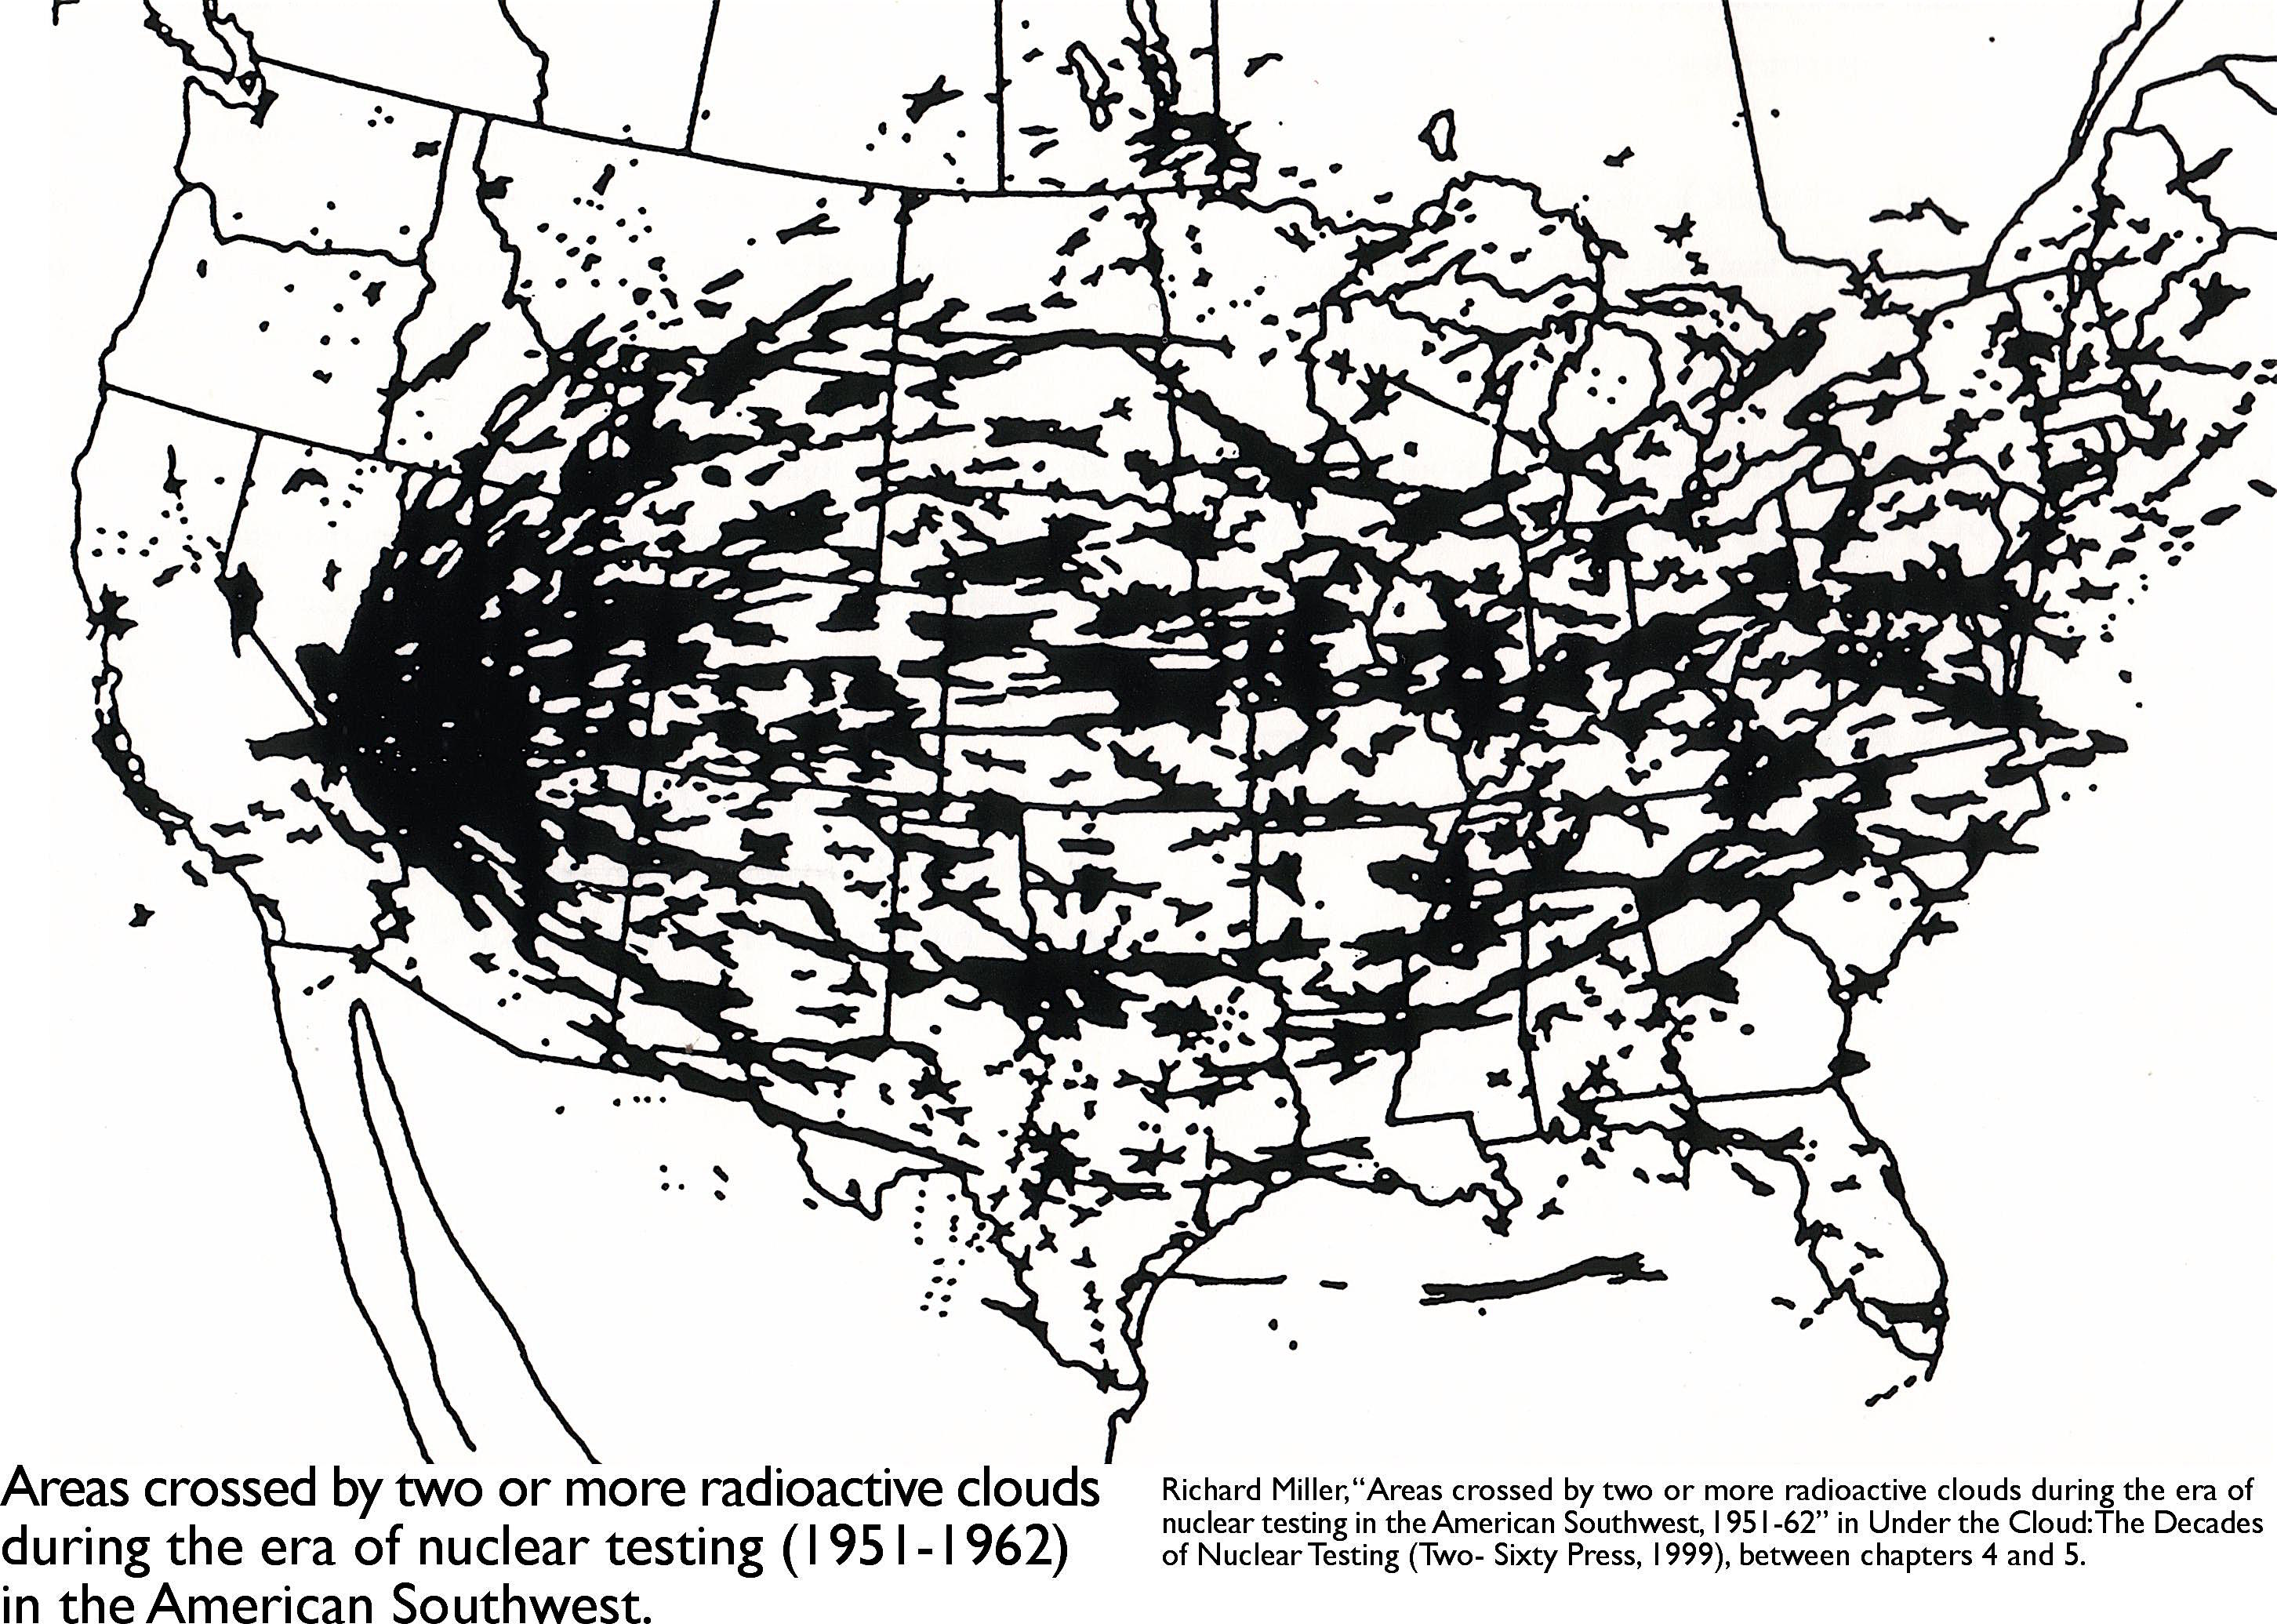   The U.S. government was tracking radioactive fallout patterns across the country.